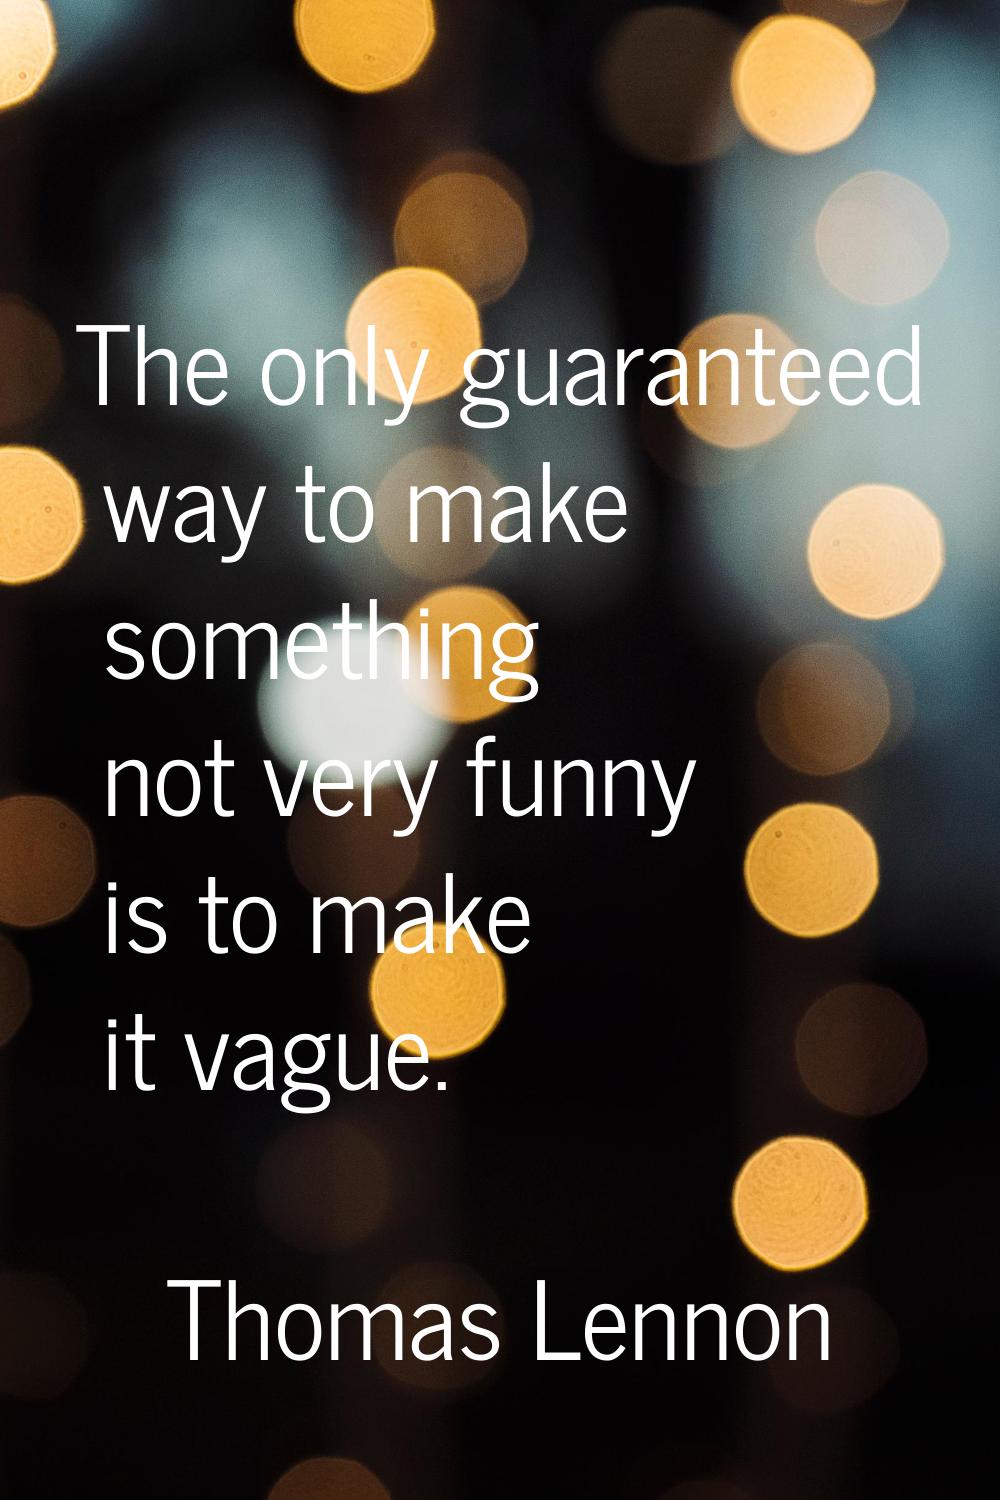 The only guaranteed way to make something not very funny is to make it vague.